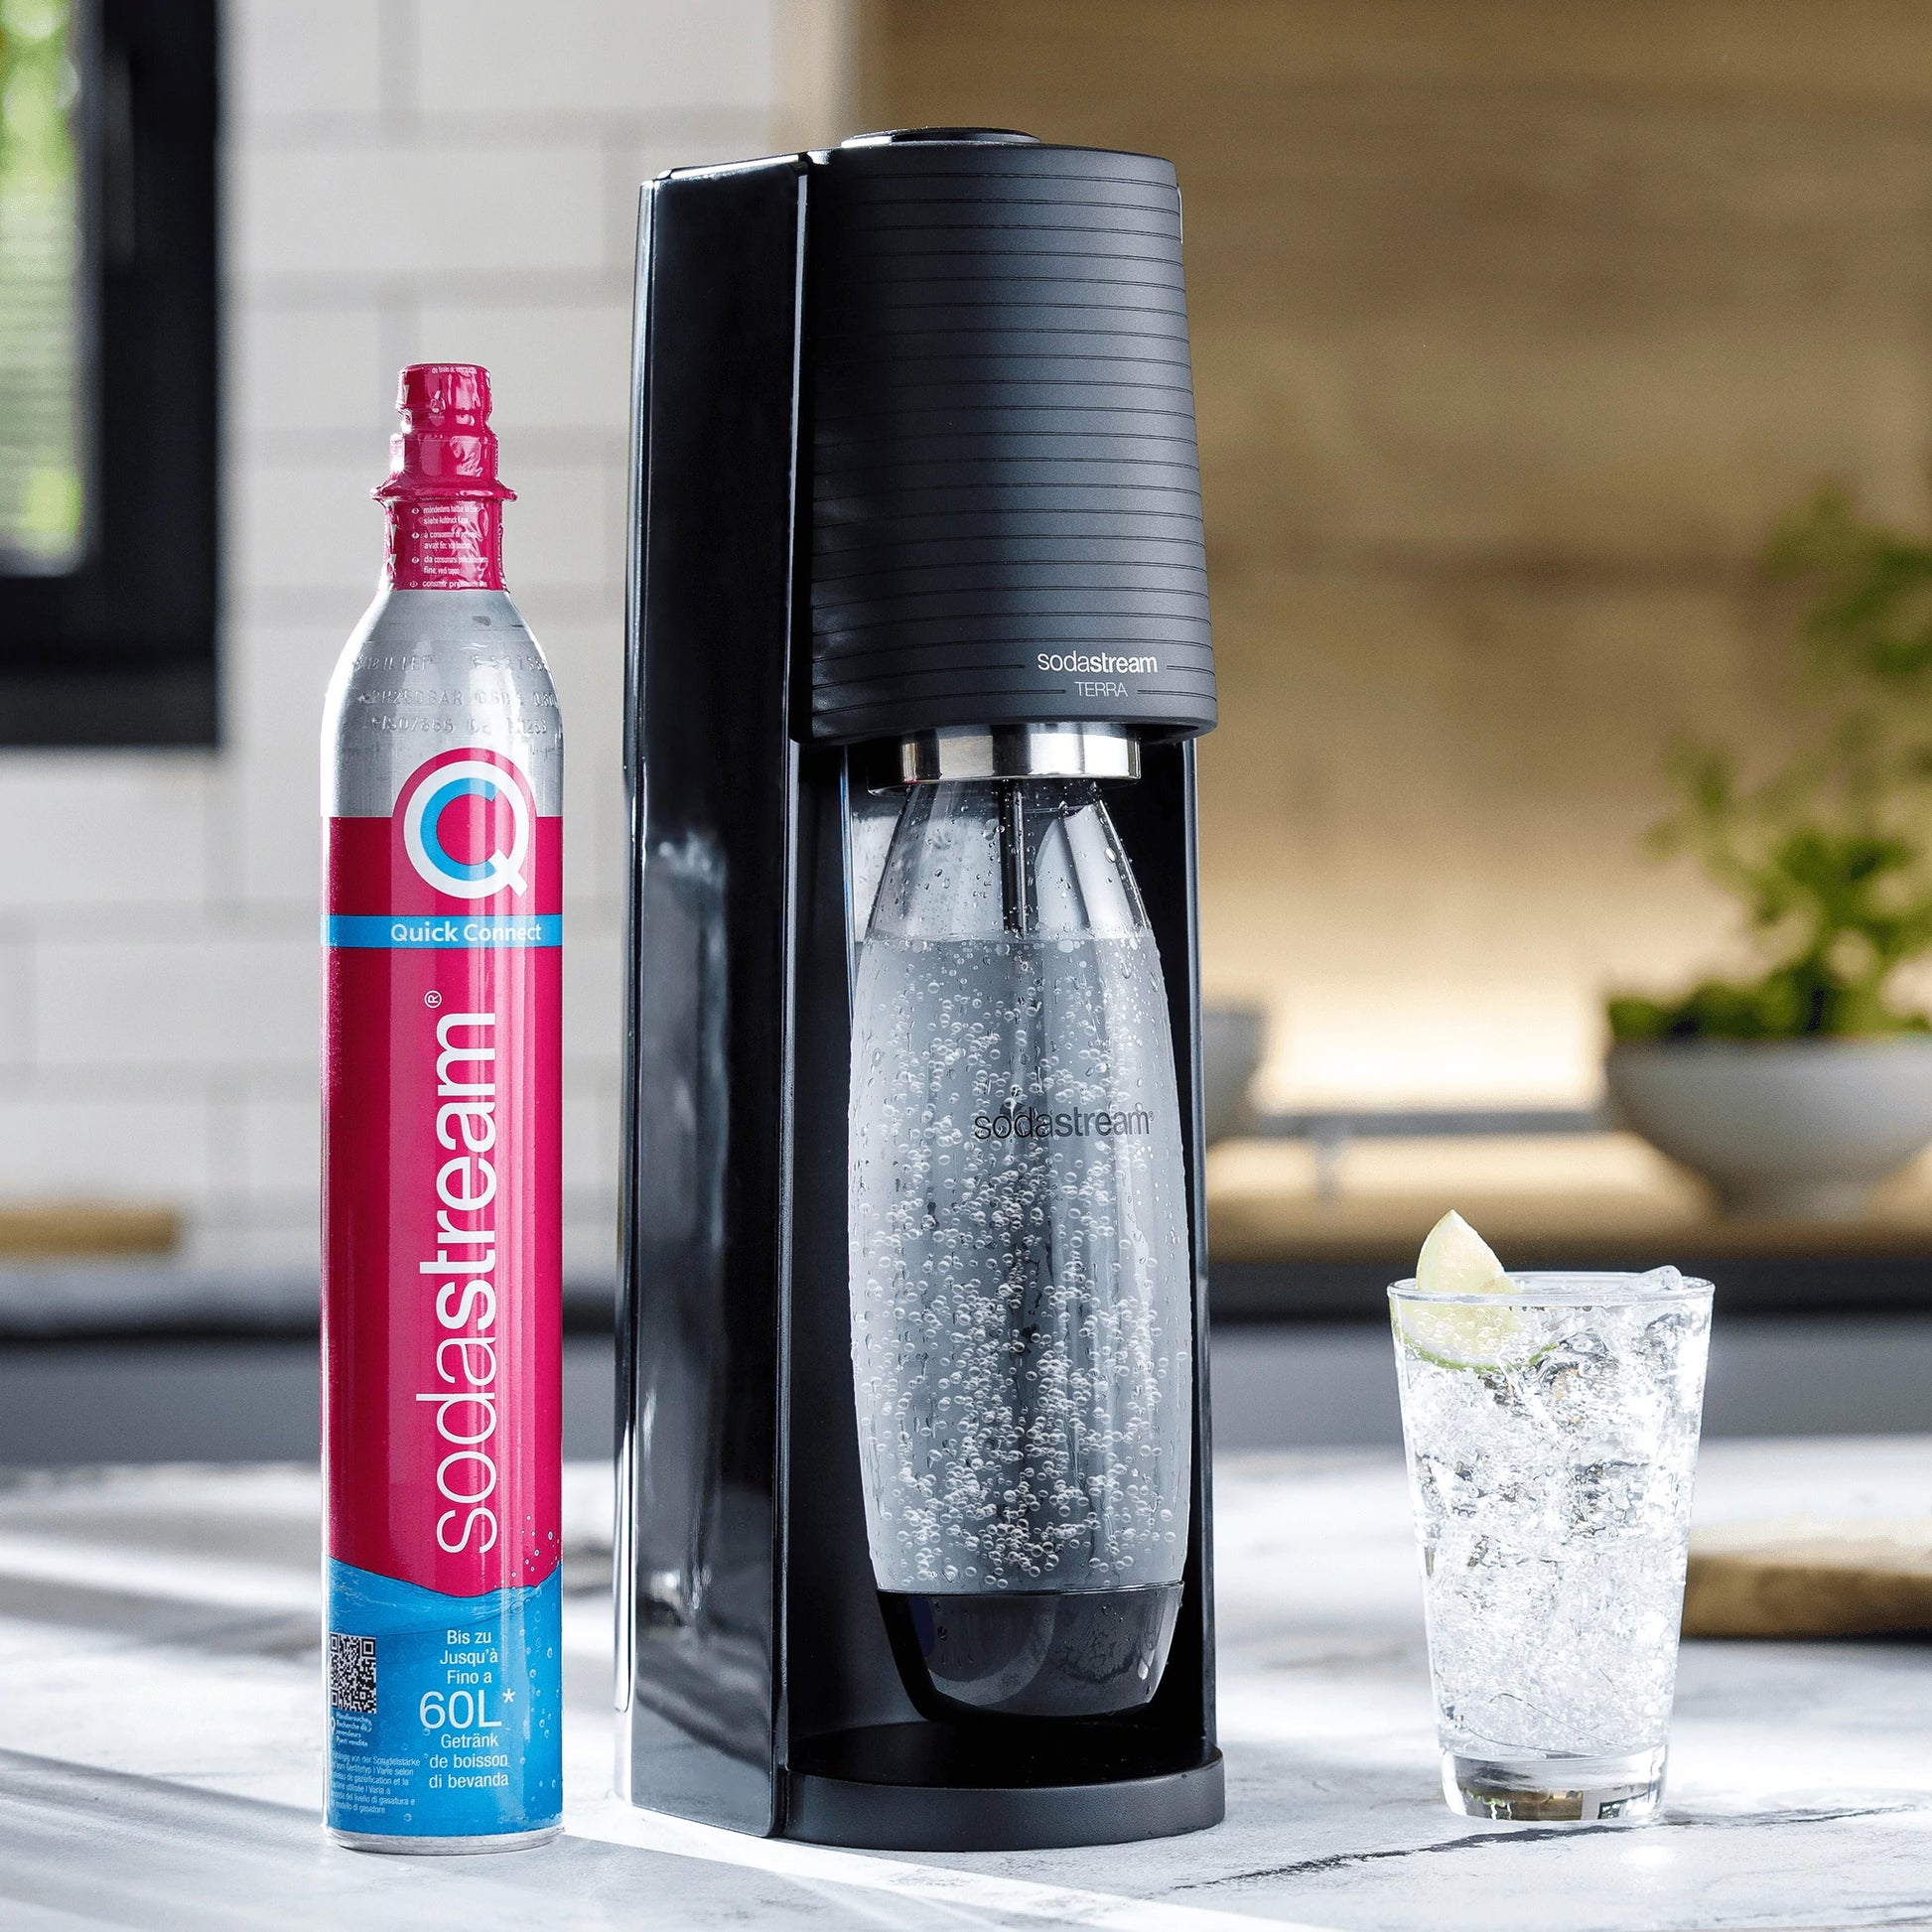 SodaStream Terra Sparkling Water Maker + Quick Connect